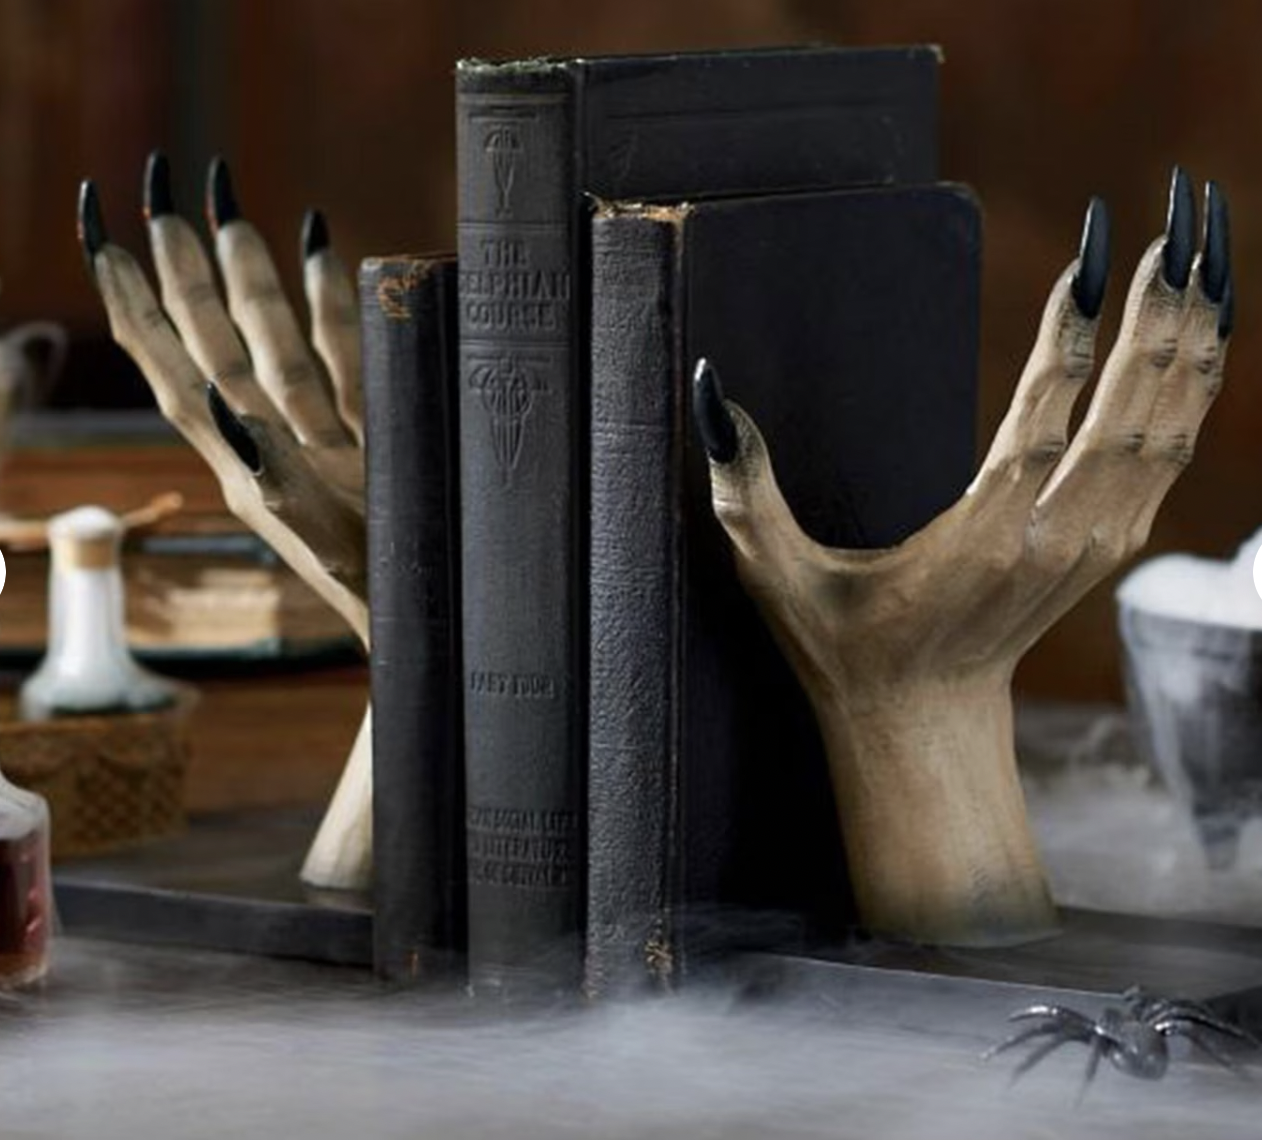 Two fake witchy hands stretched upwards with long black nails hold up three books as bookends